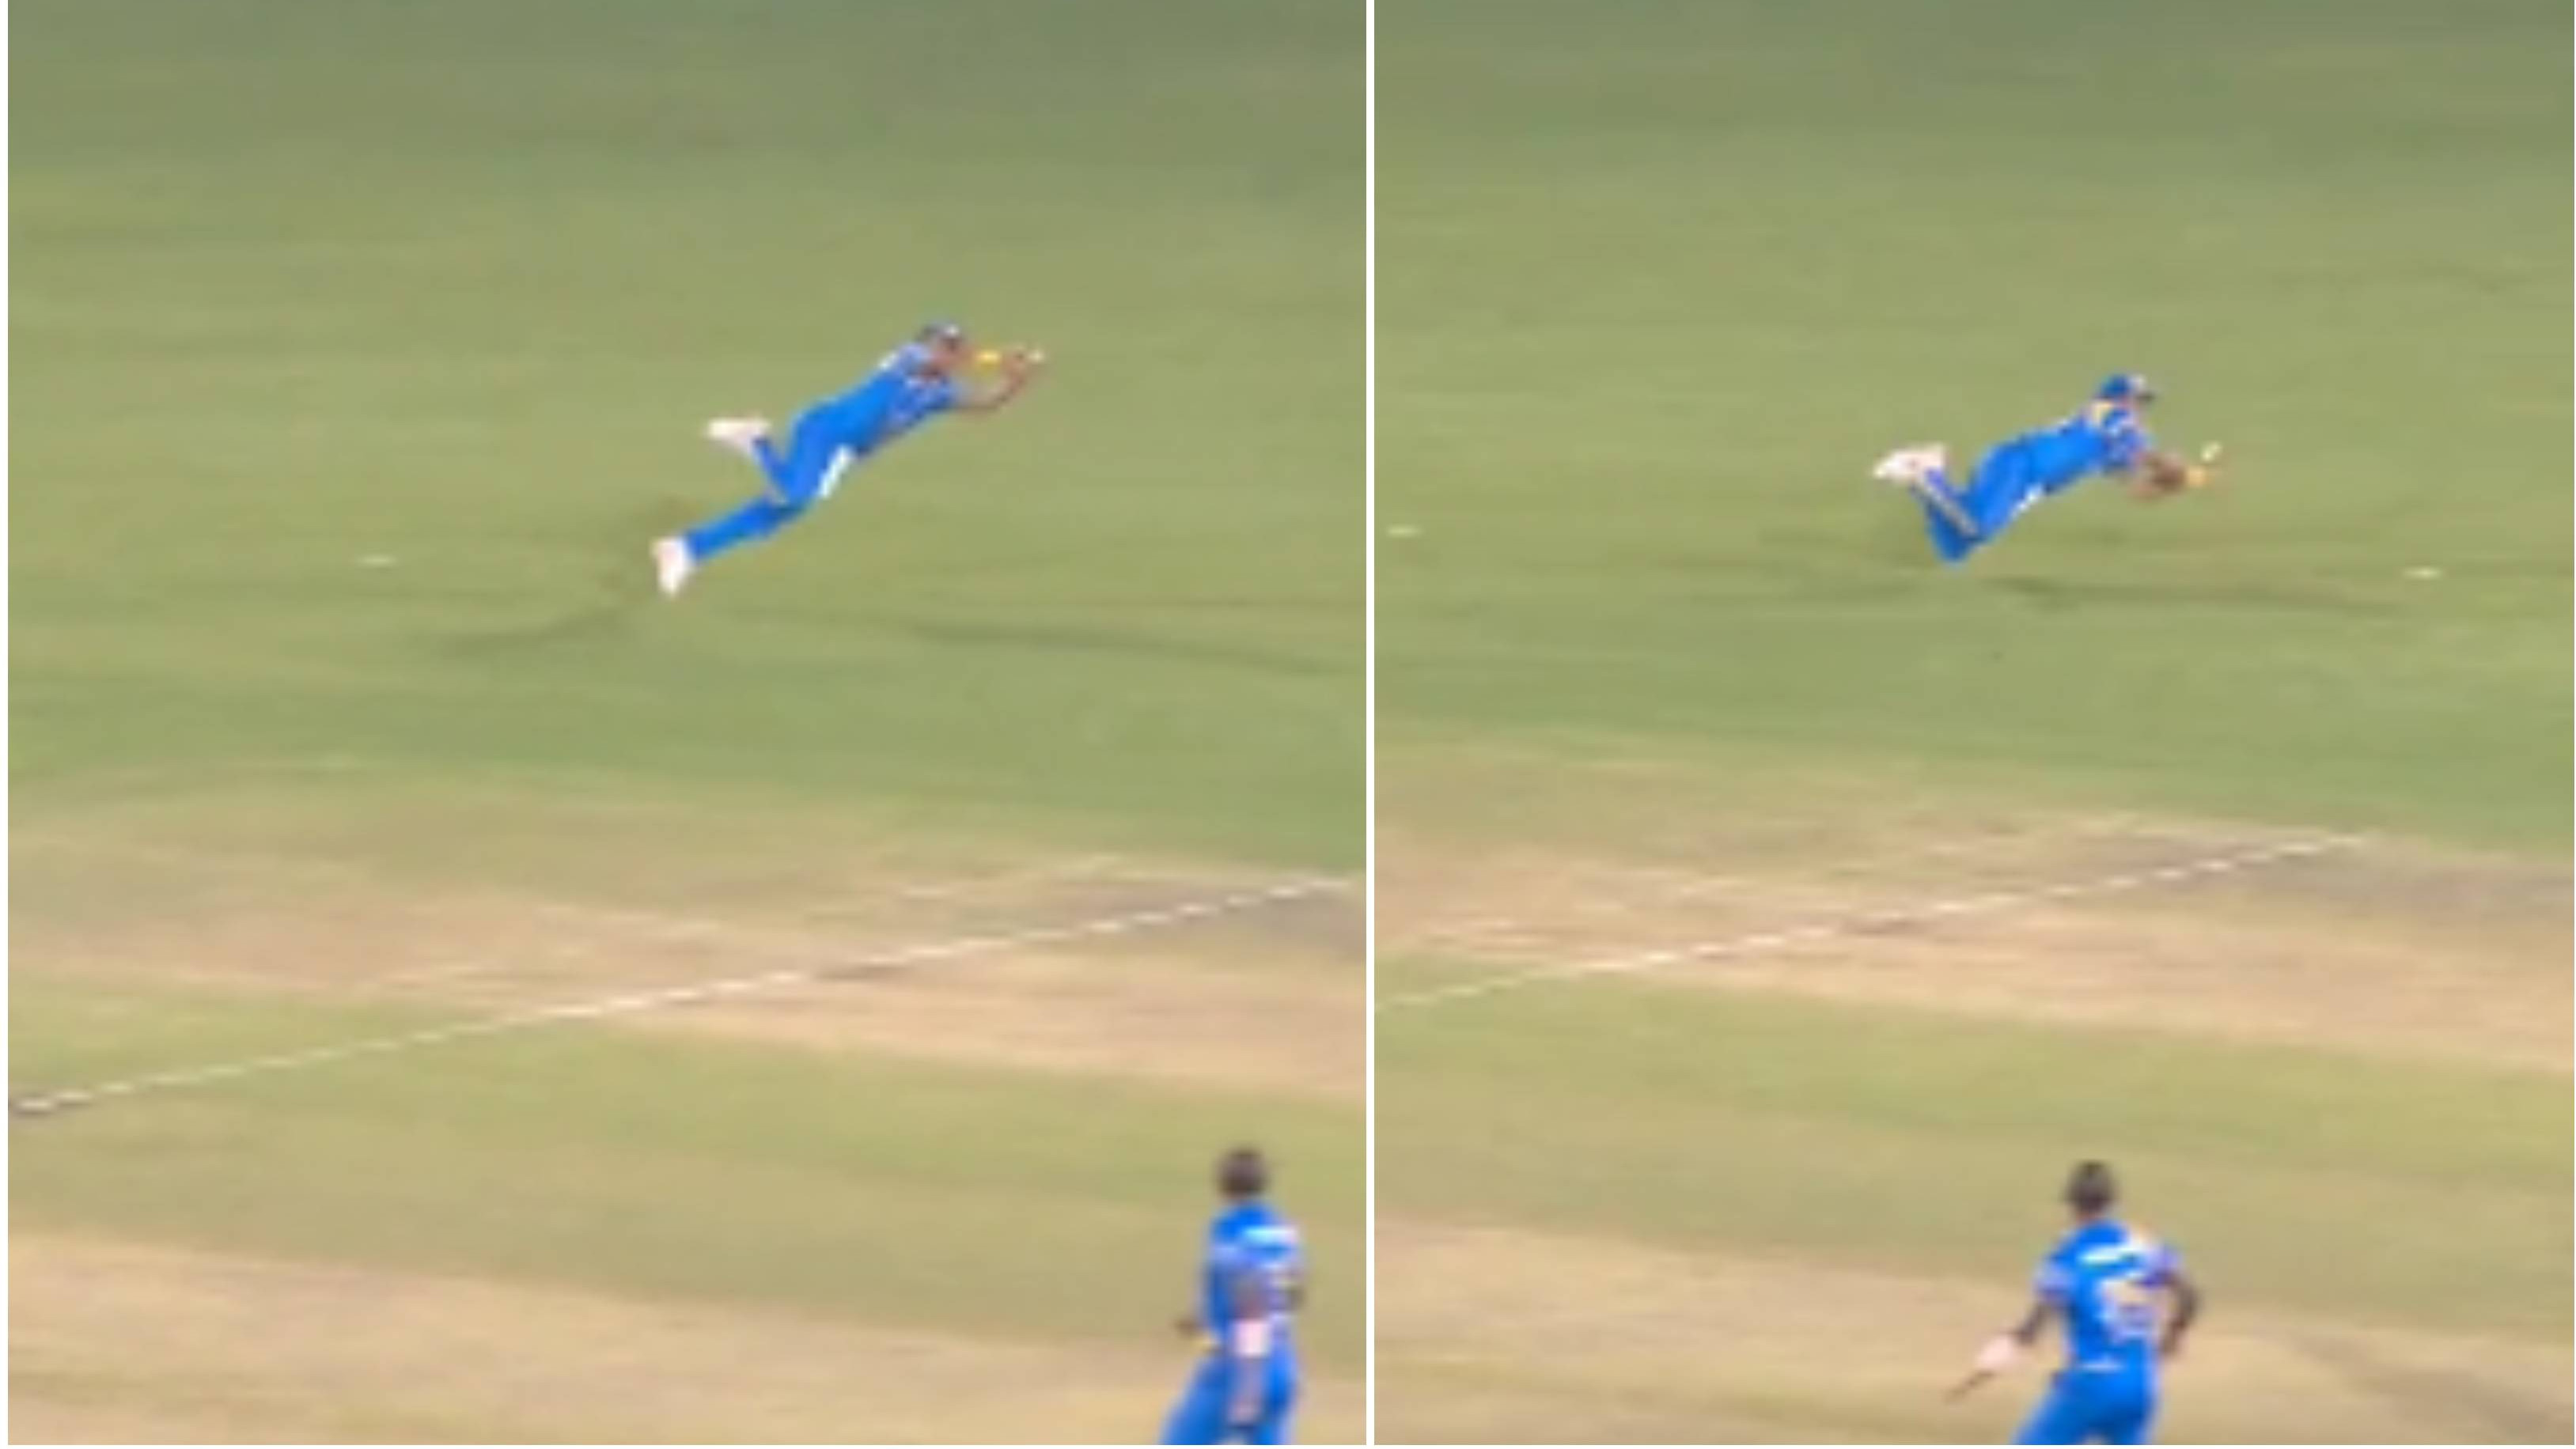 RSWS 2022: WATCH – Suresh Raina turns back clock to pluck a stunner at point against Australia Legends